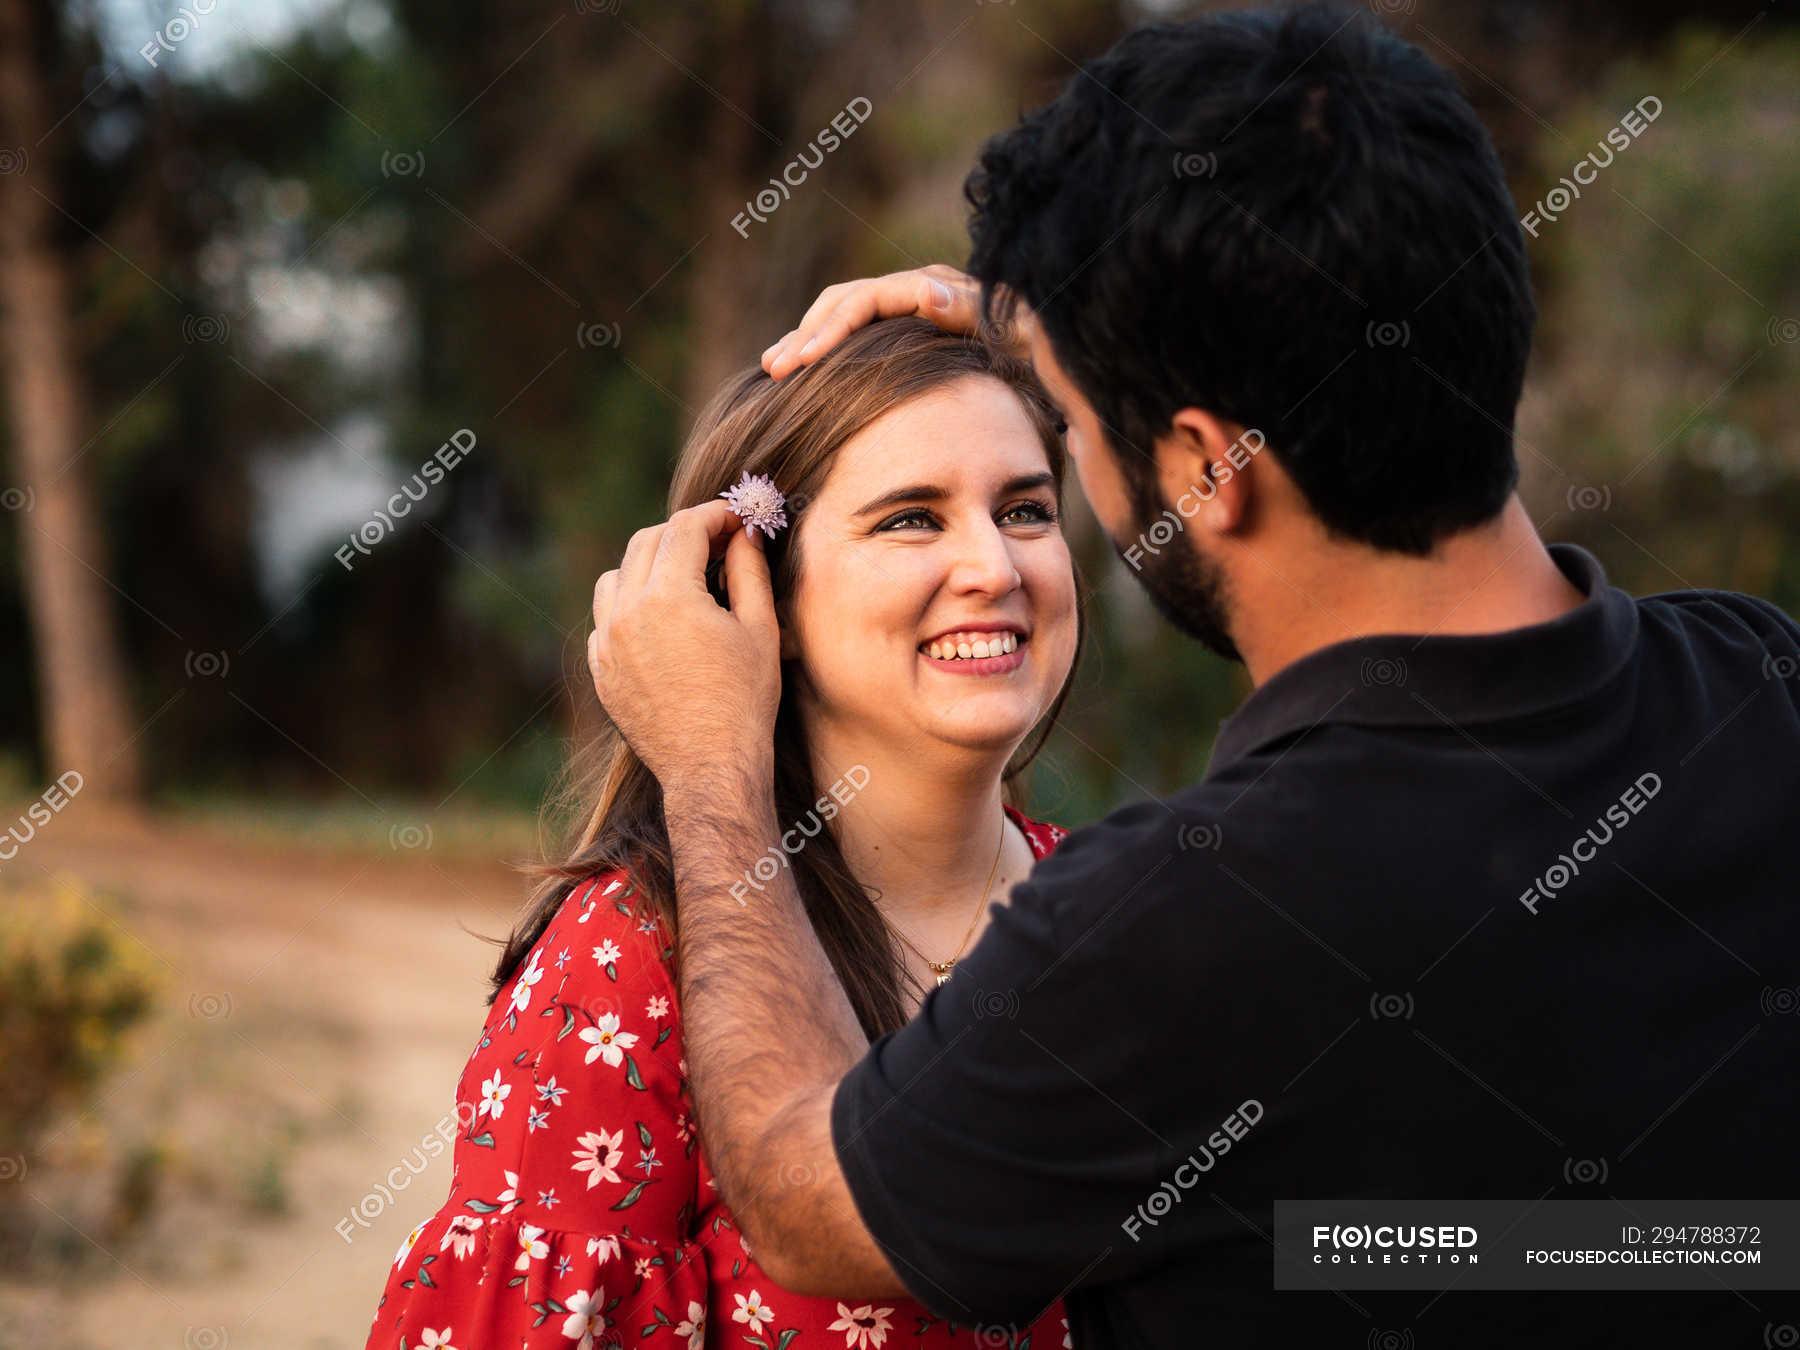 Man smiling at wife in blurred nature and putting on flower in hair —  husband, girlfriend - Stock Photo | #294788372